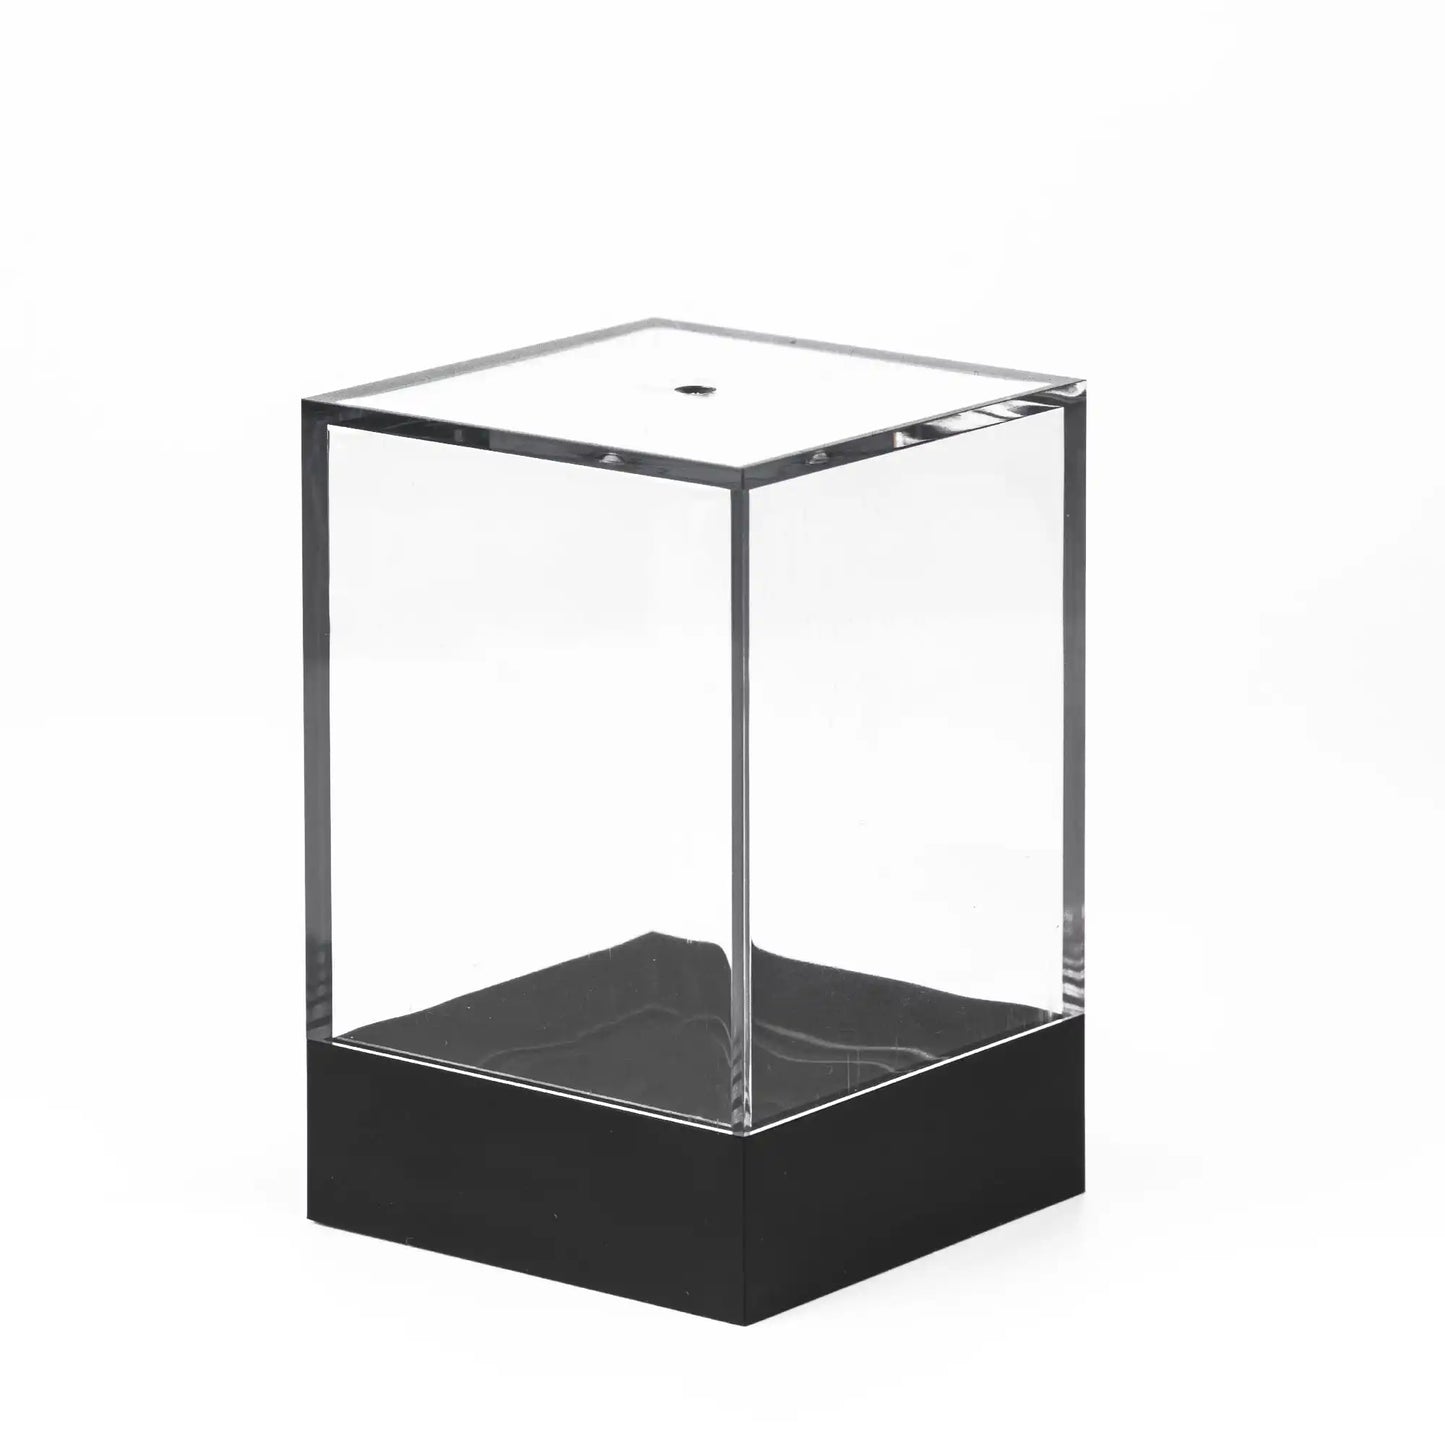 Dice Show Box ,Clear Acrylic Display Case,Black Base Dustproof Protection Model Box,Toy Display Box